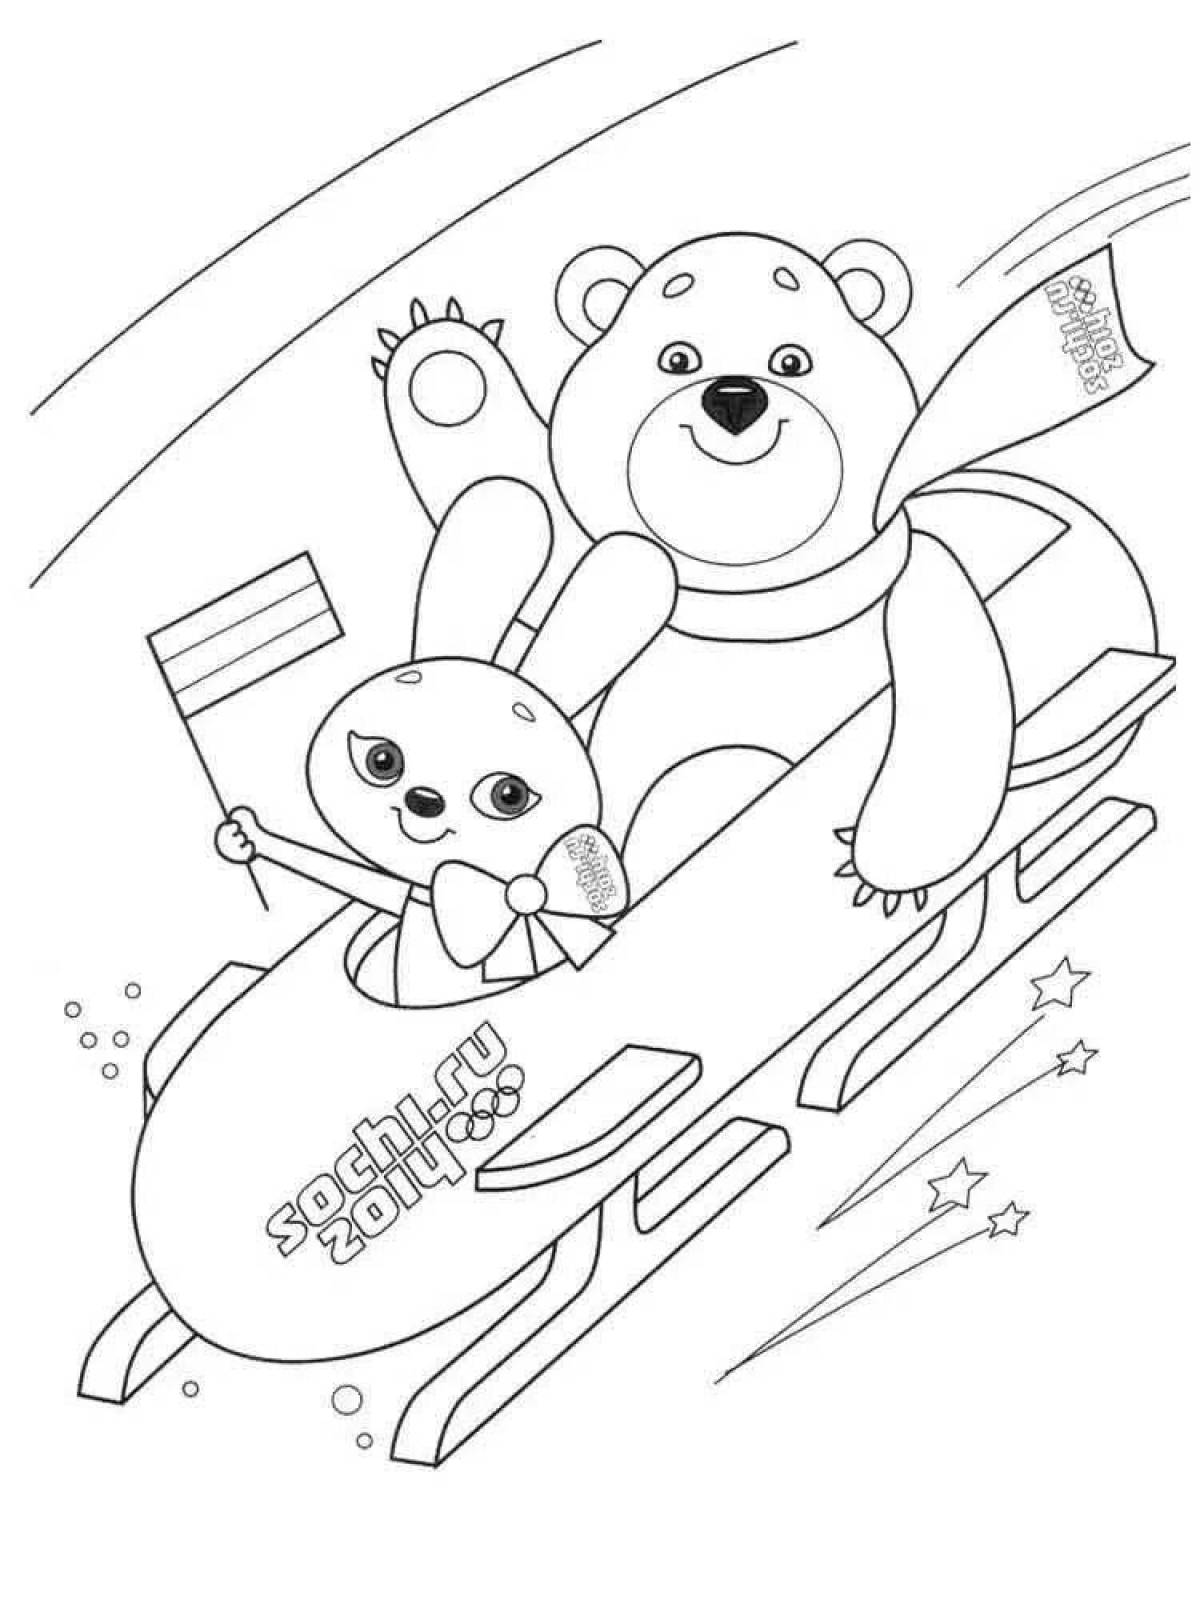 Amazing coloring book for kids winter sports